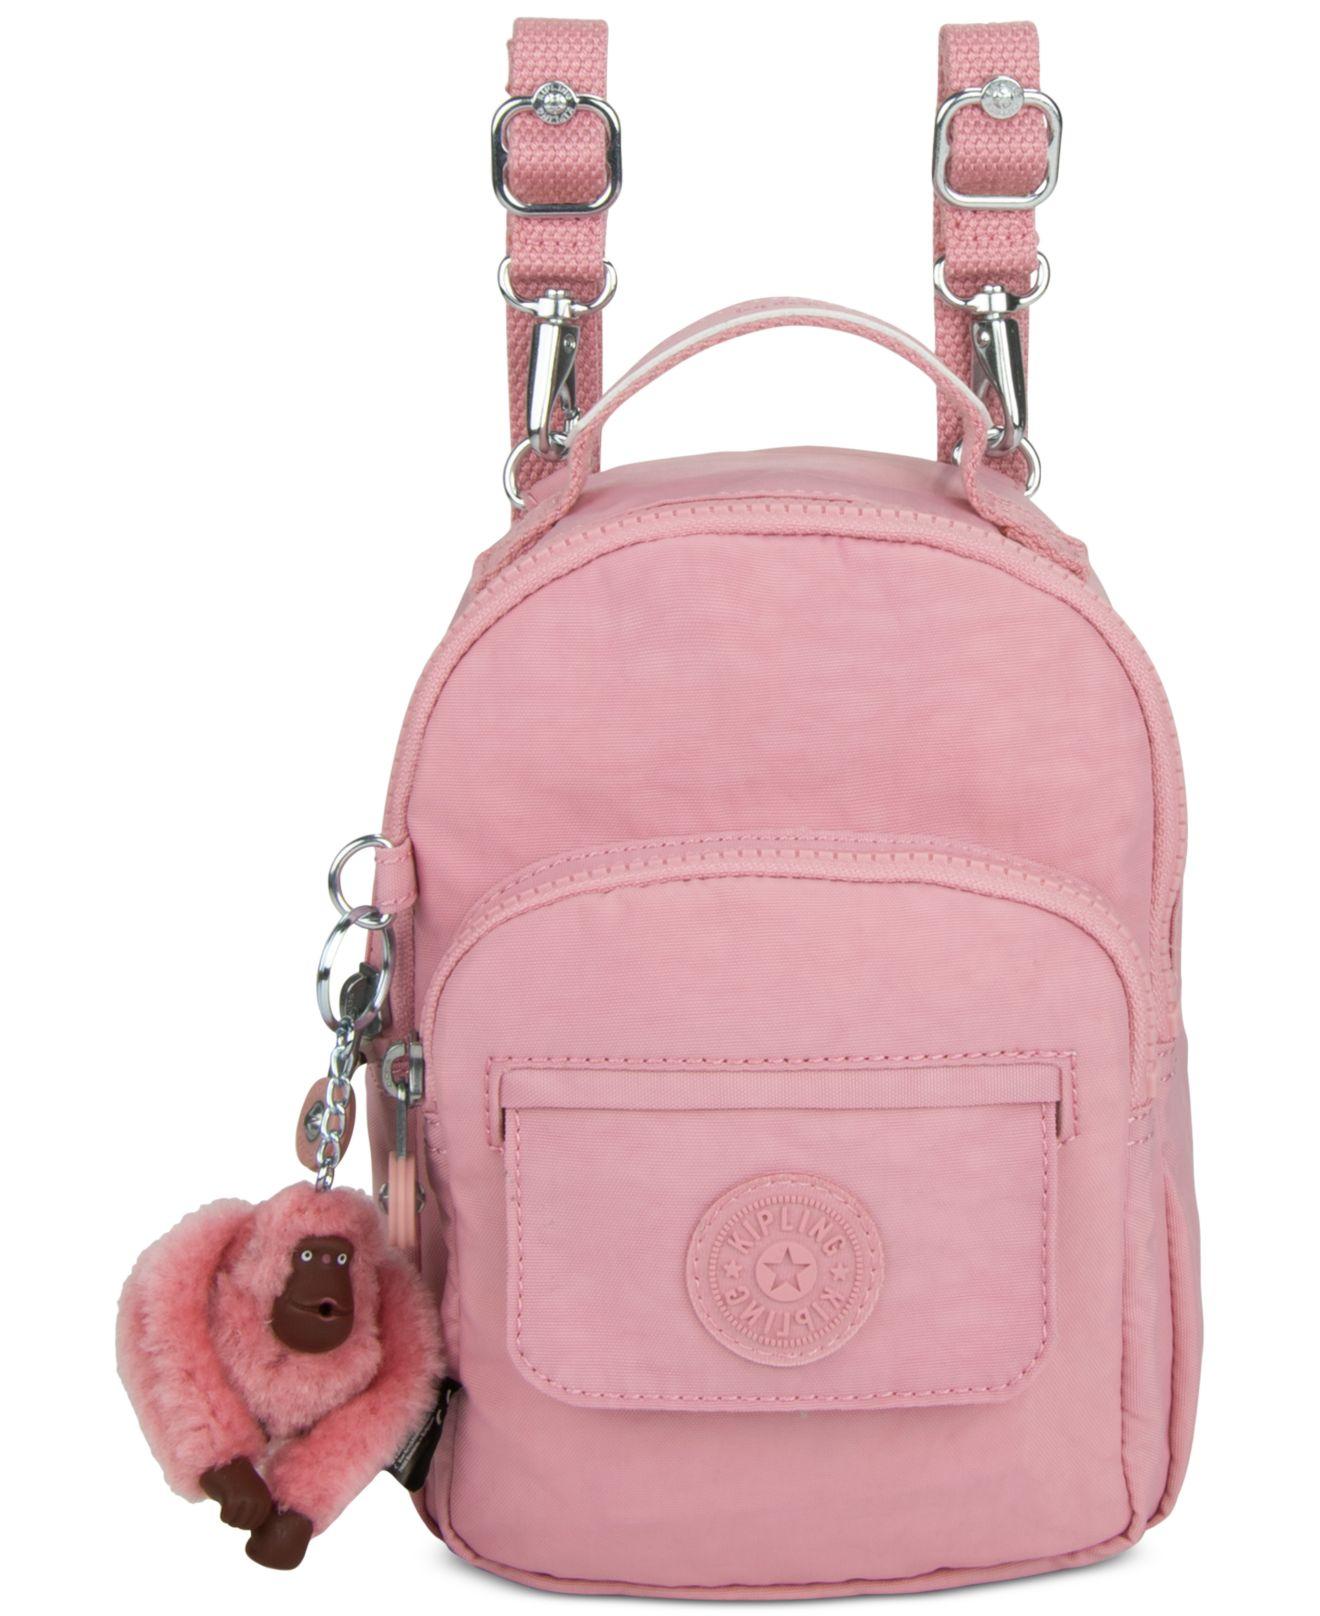 Kipling Synthetic Alber 3-in-1 Convertible Mini Bag Backpack in Pink | Lyst  Canada